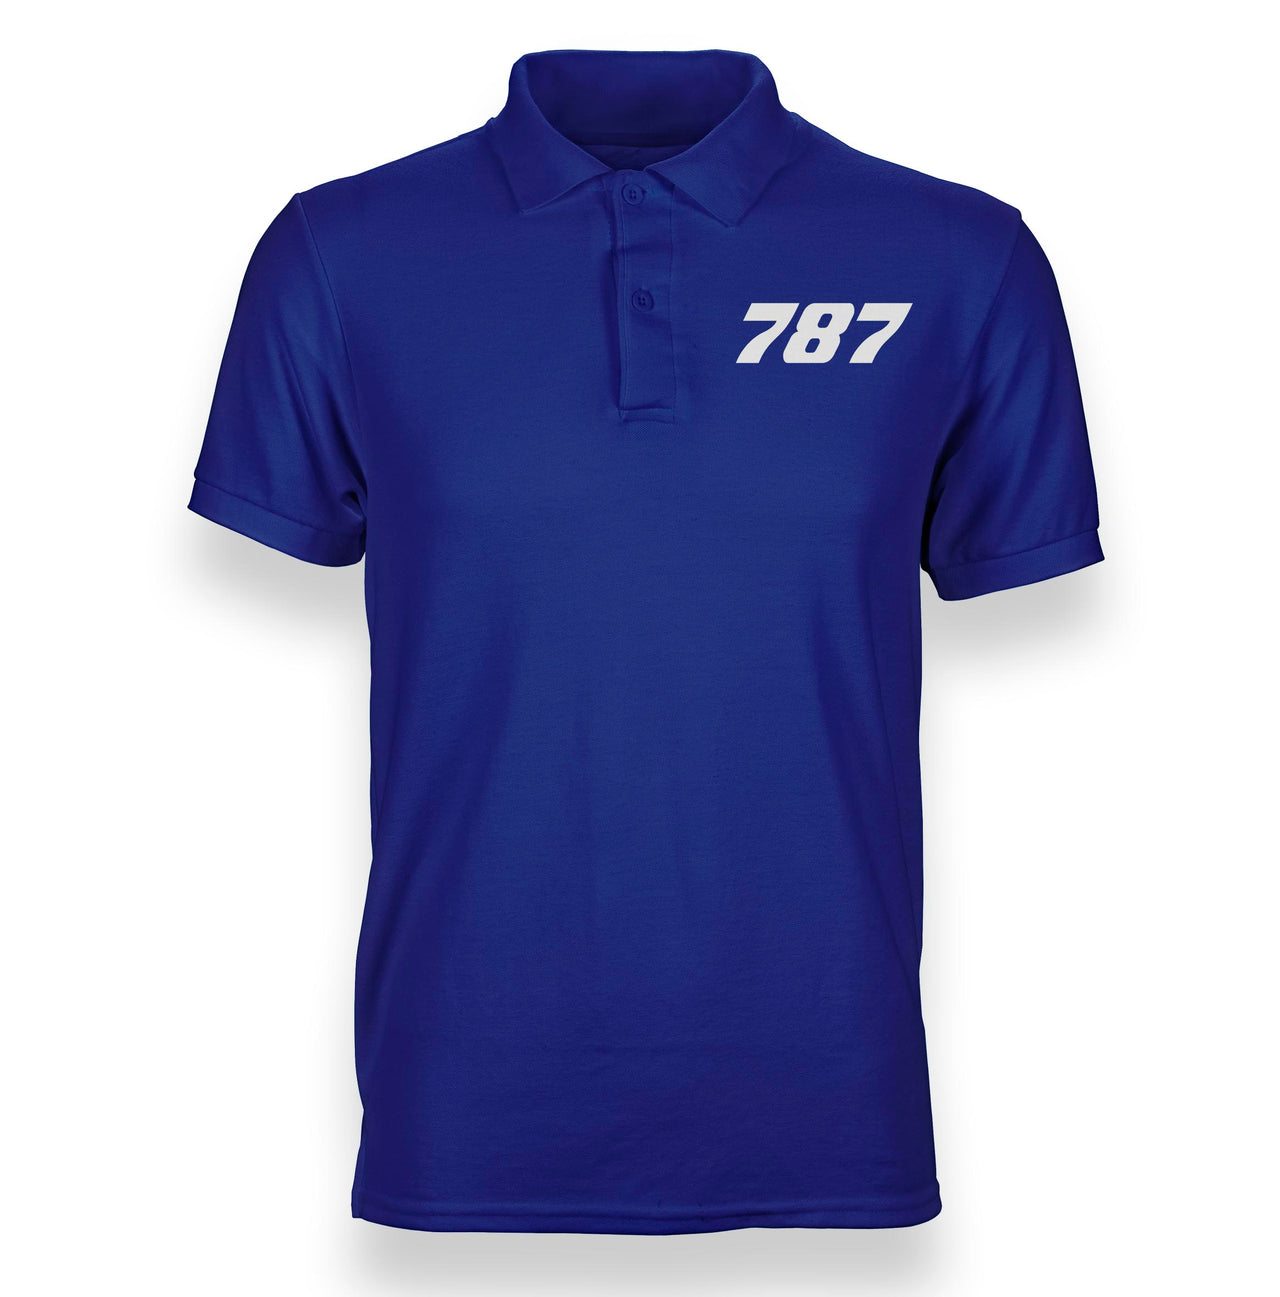 Boeing 787 Flat Text Designed Polo T-Shirts